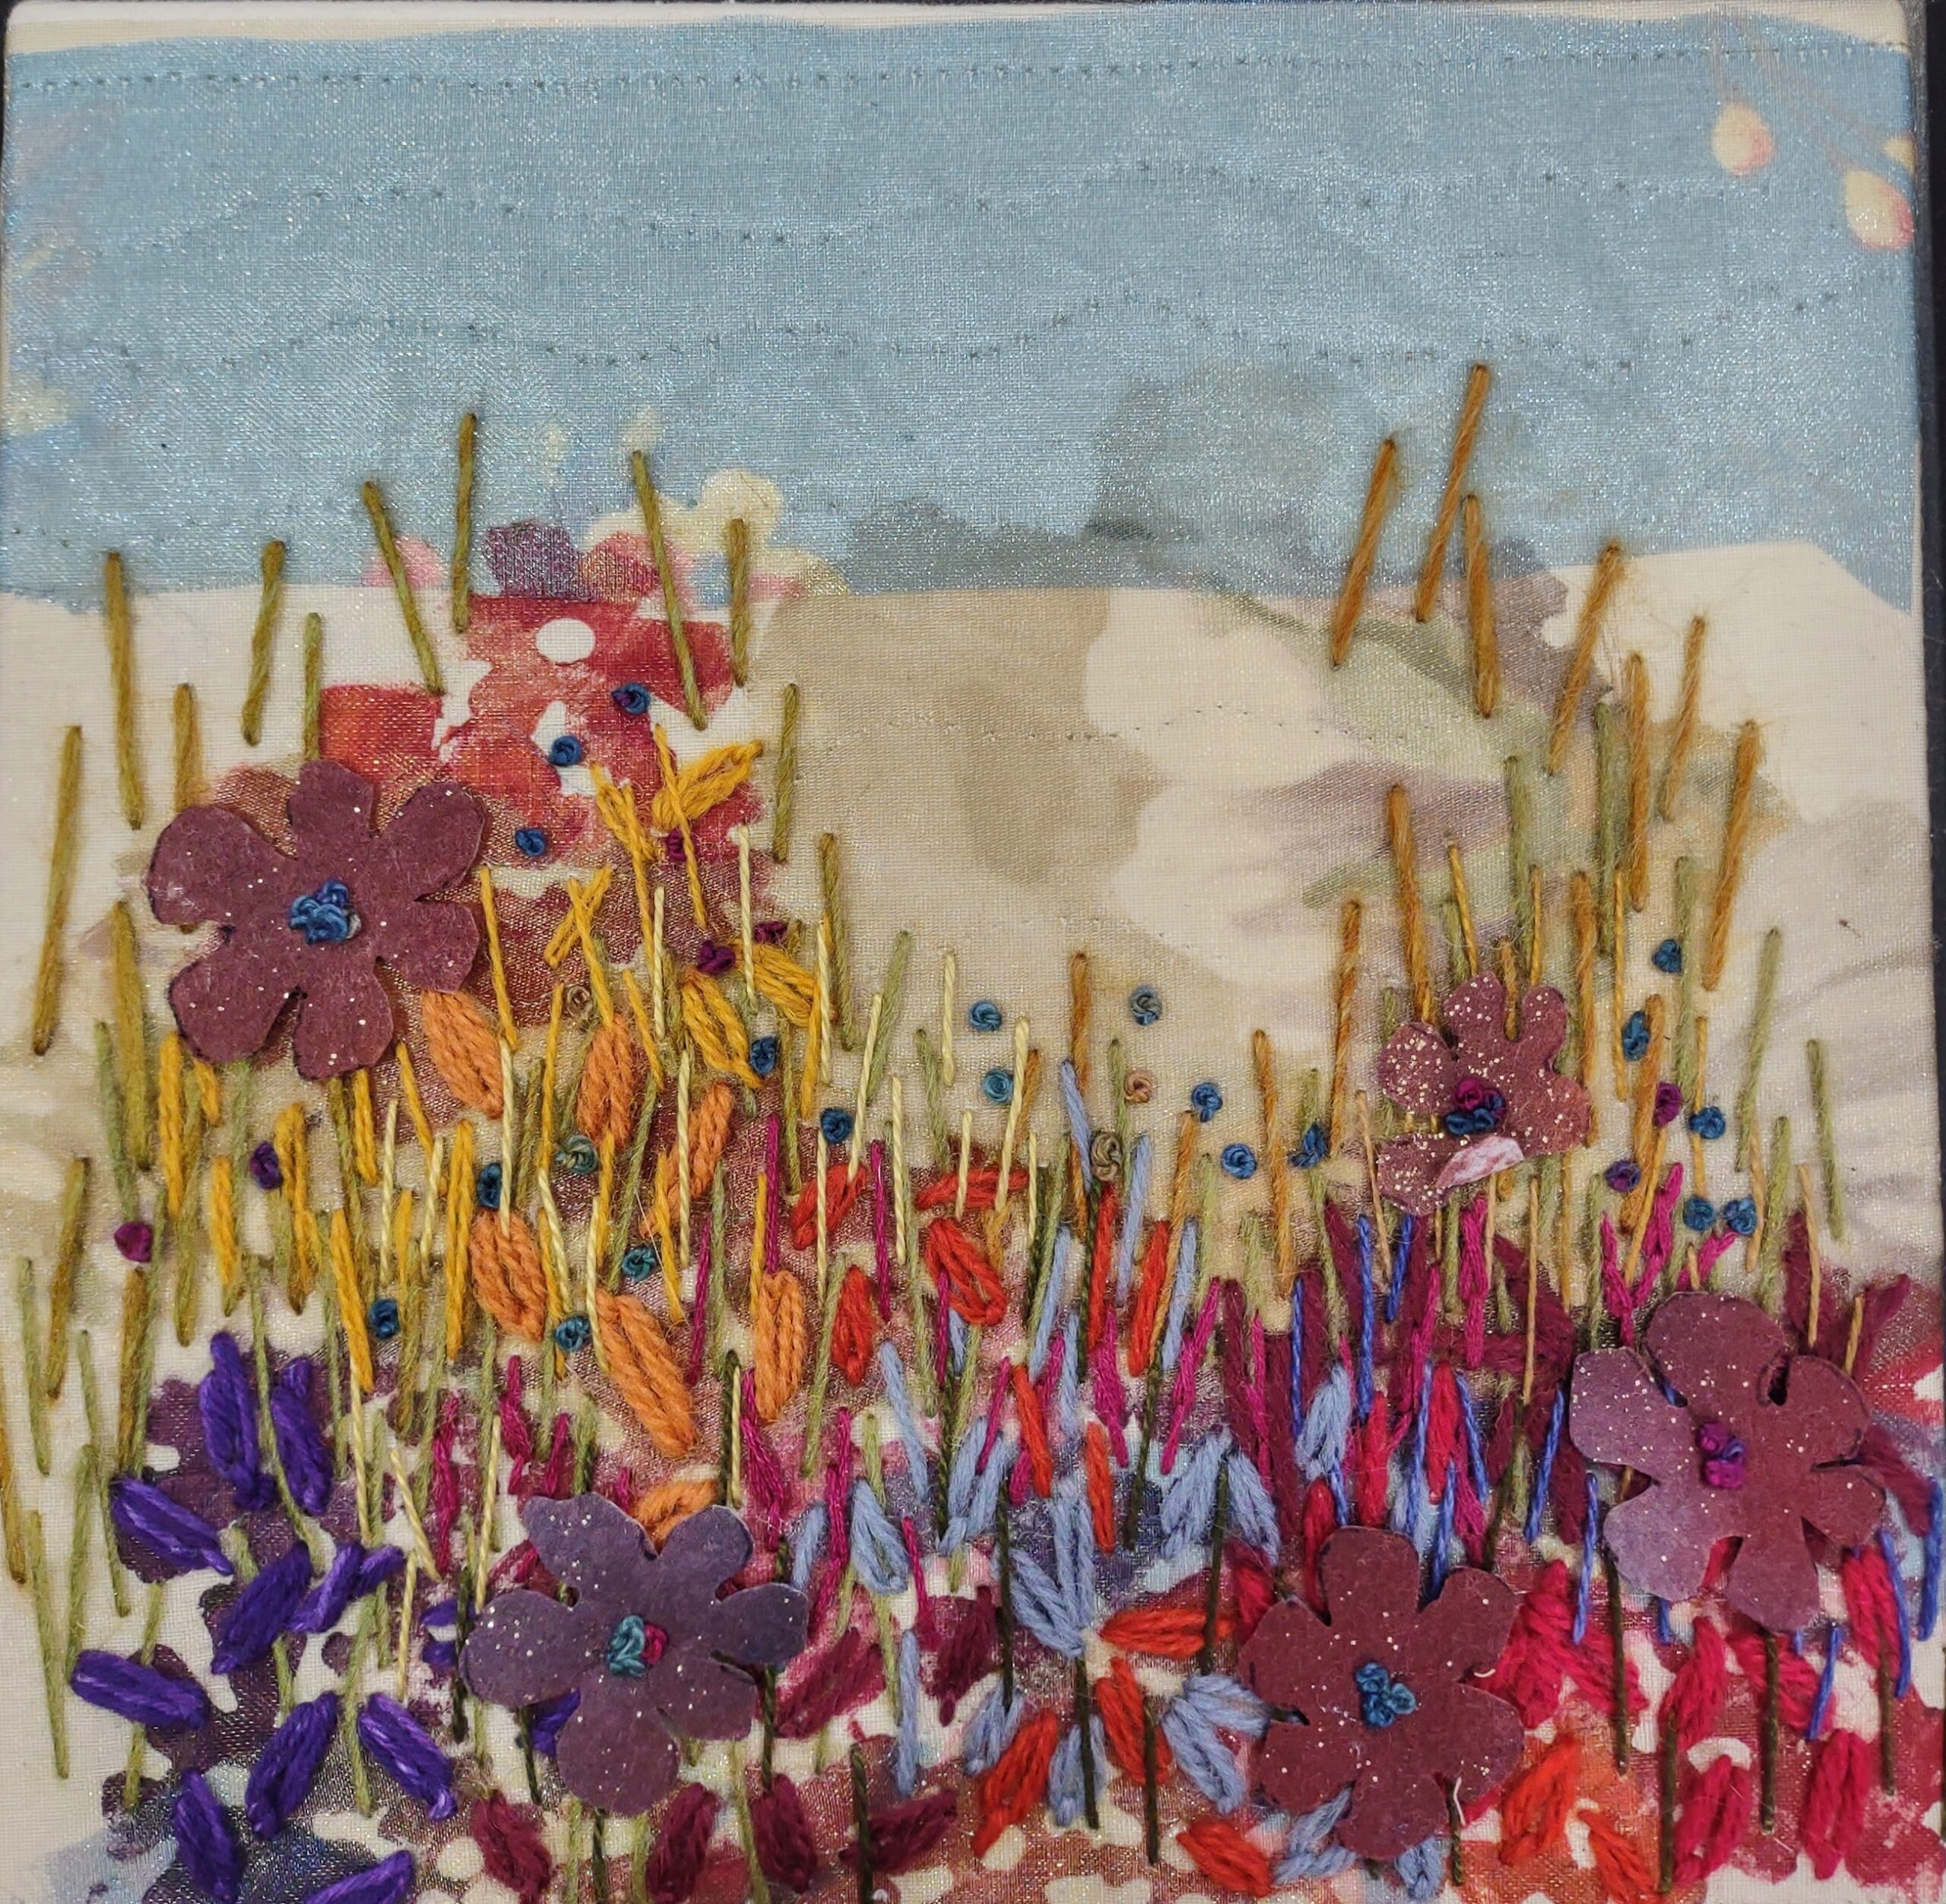 Hand-stitching flowers in texture and color at Gallery at the VAULT ...